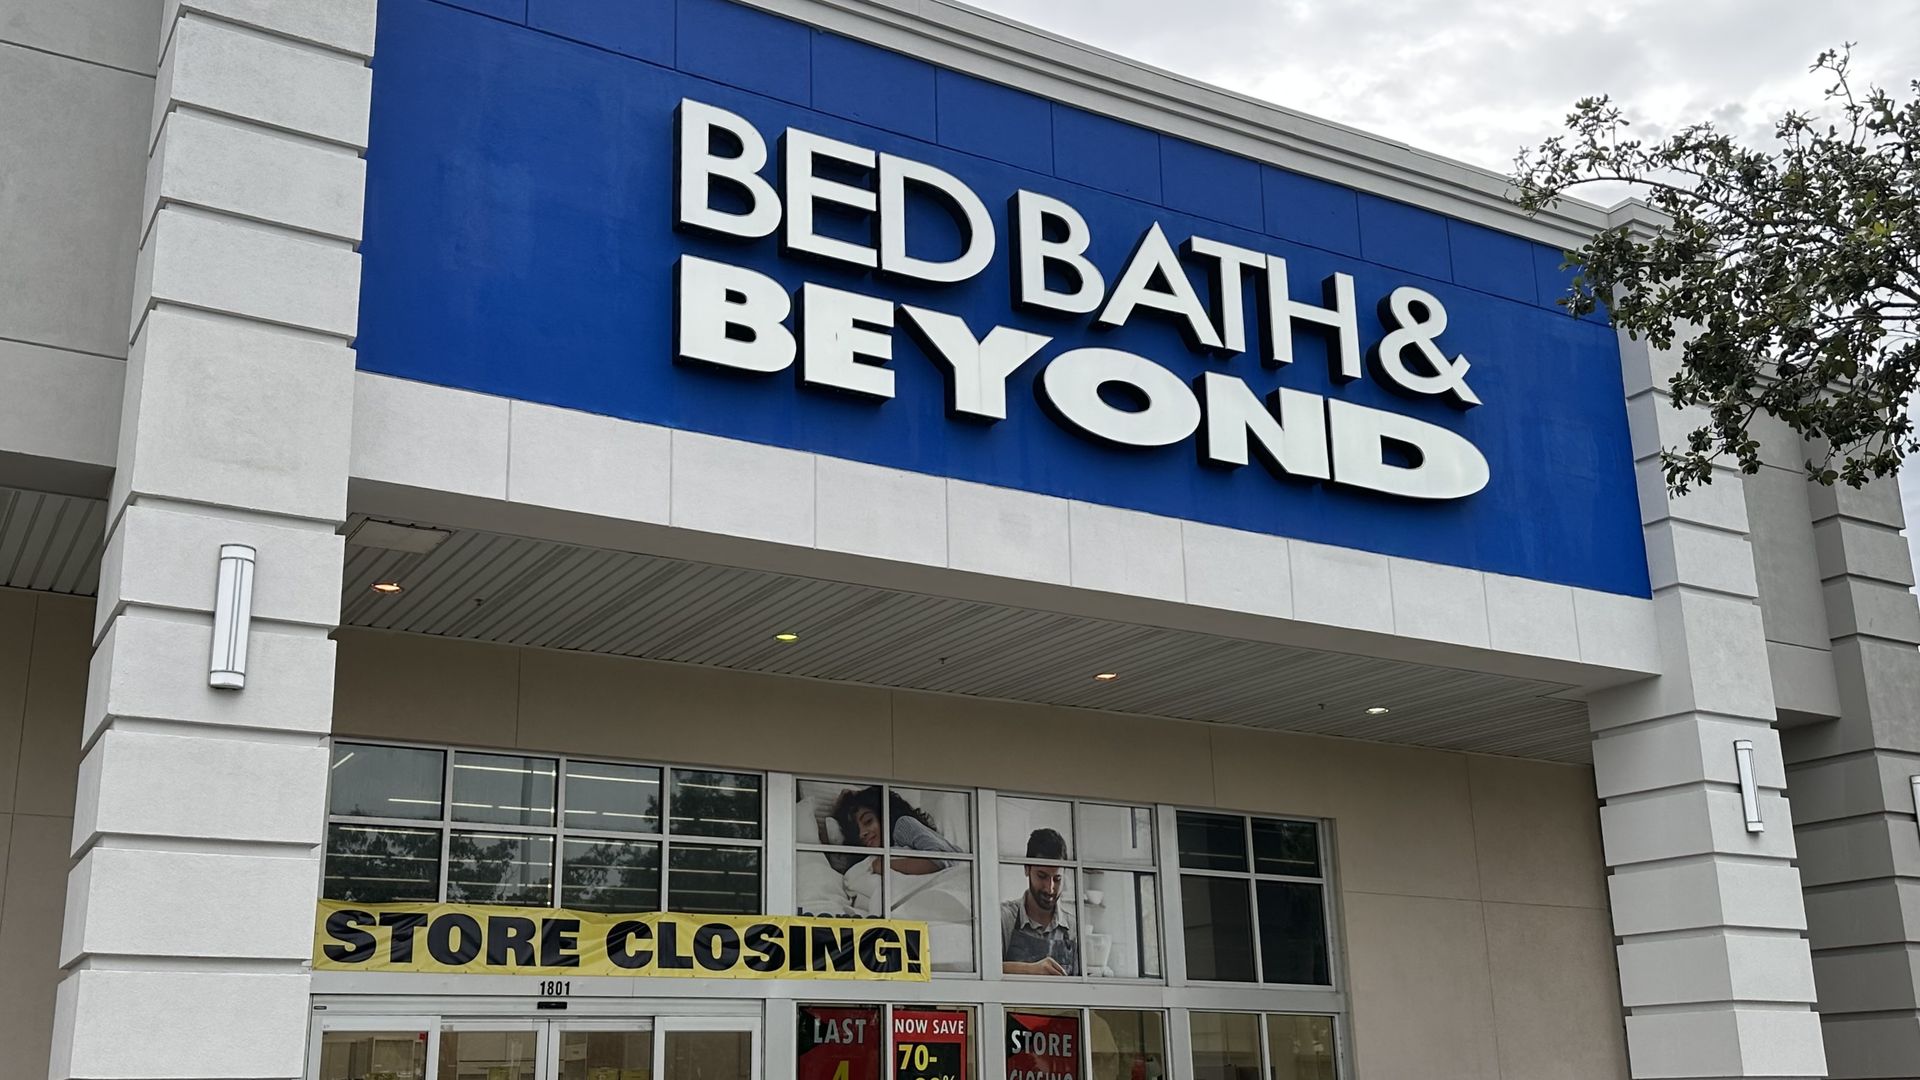 Bed Bath and Beyond closing sale: Stores' last day is Sunday, July 30